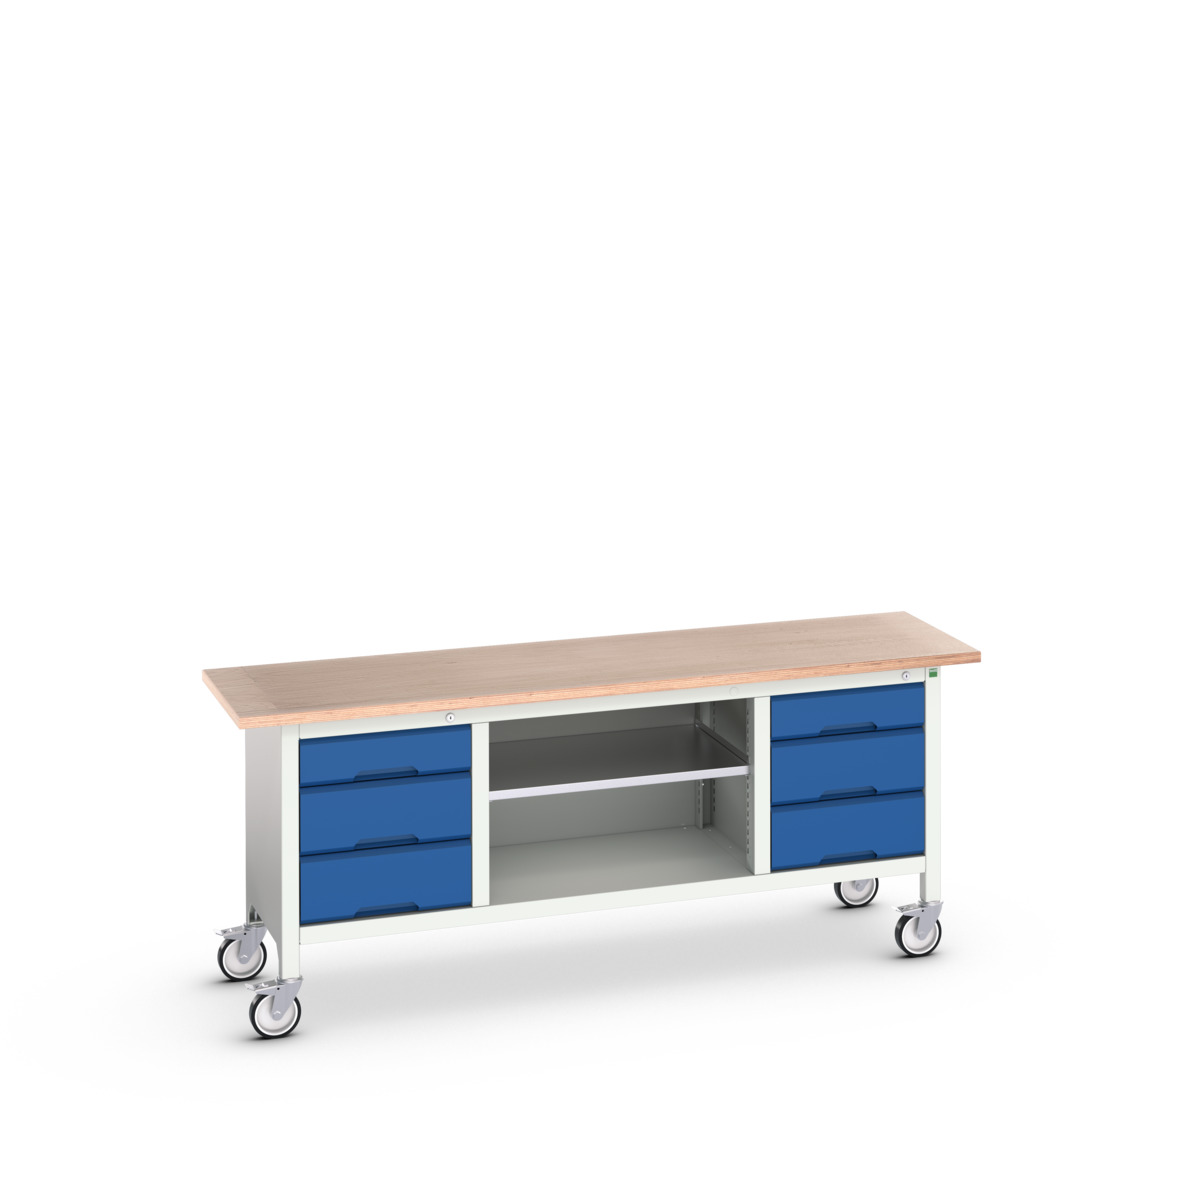 16923234.11 - verso mobile storage bench (mpx)